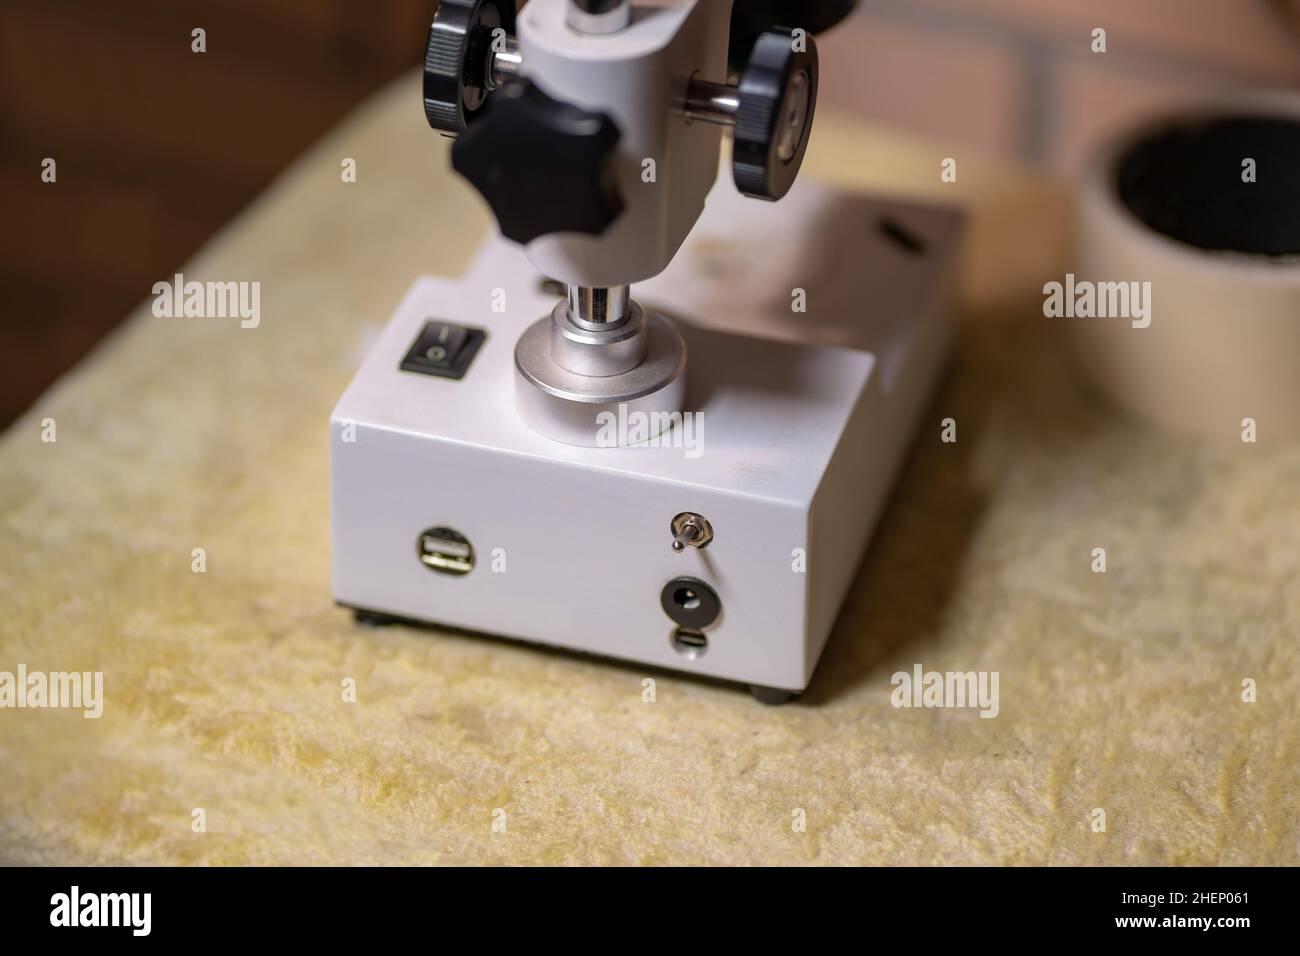 Stereo Microscope for repairing cell phone Mobile Phone Repair with Top and Bottom LED Light. Stock Photo